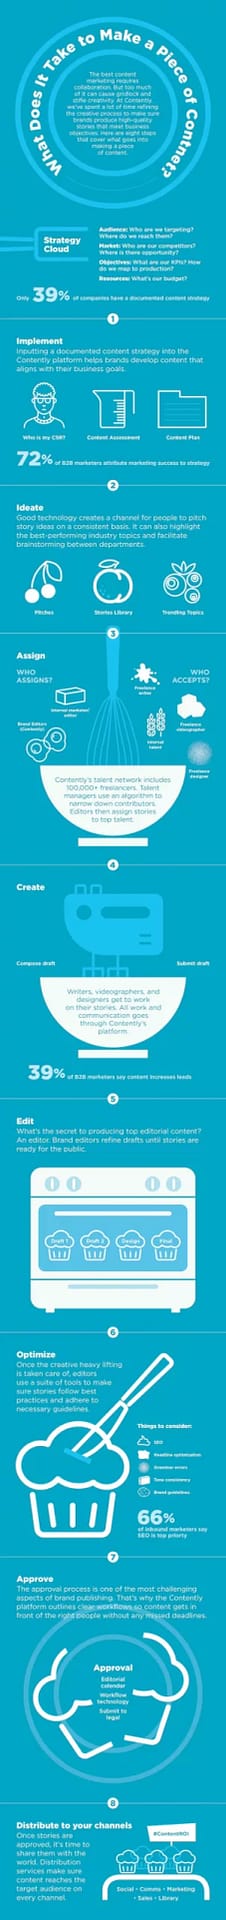 Make a Piece of Content Infographic.jpg scaled 1